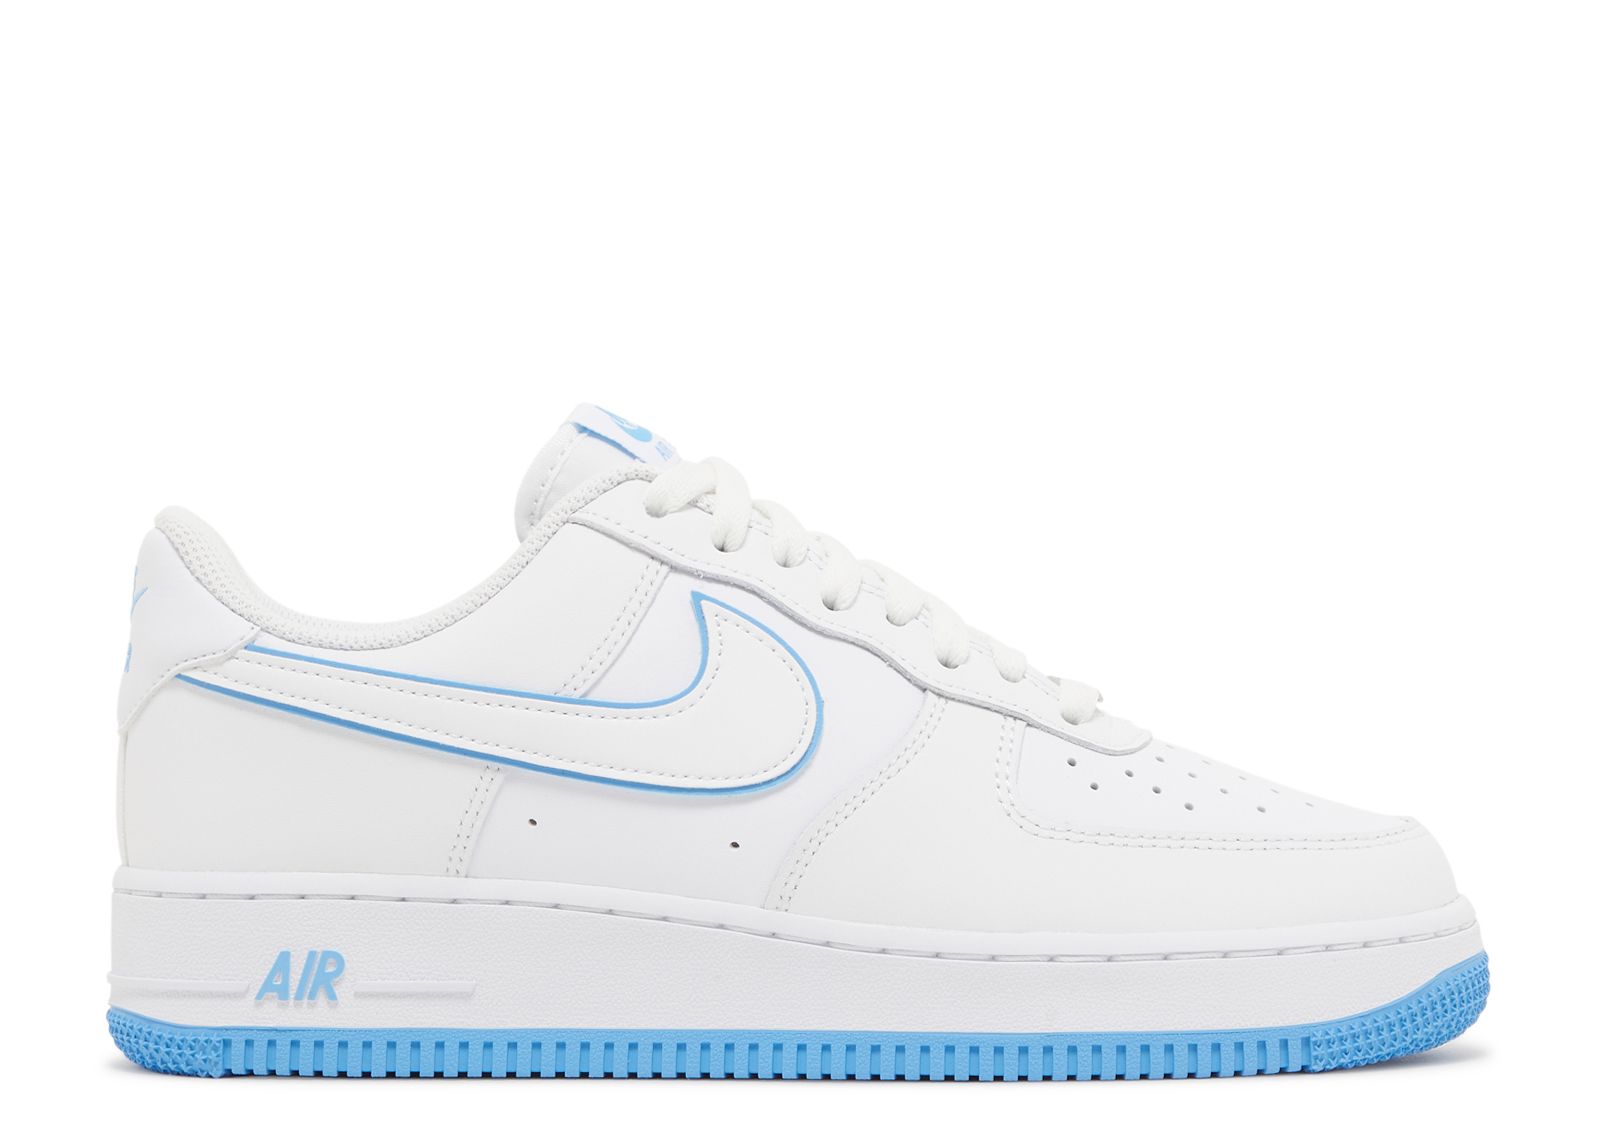 Кроссовки Nike Air Force 1 '07 'White University Blue', белый new nike air force 1 script swoosh women white skateboarding shoes original light weight outdoor sports sneakers